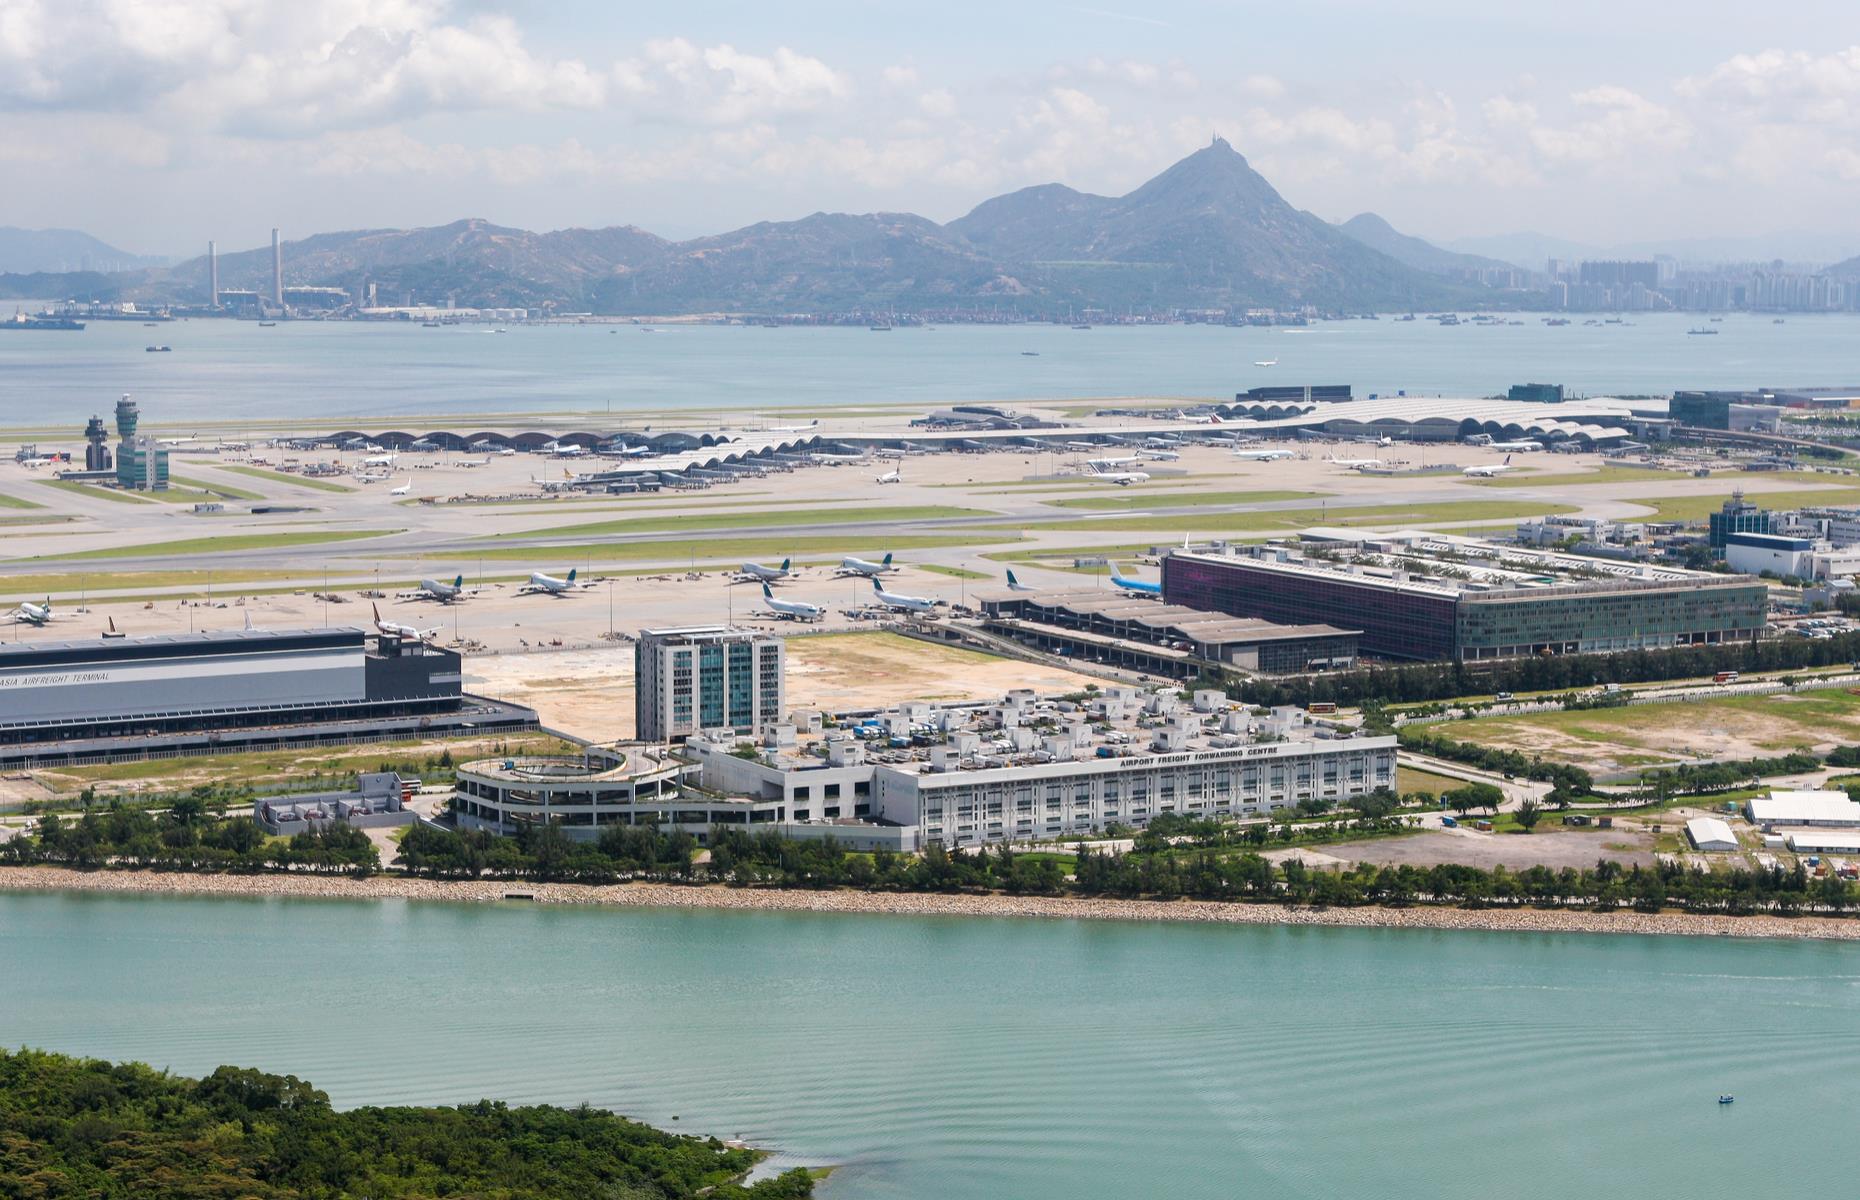 Terminal one has had a makeover in recent years, introducing themed breakout zones including an interactive children's area, a workspace with reclining chairs, plus a zone for meditation and movie-watching. No one should miss the SkyDeck roof terrace with its fantastic views over the artificial island of Chek Lap Kok, where the airport is located.